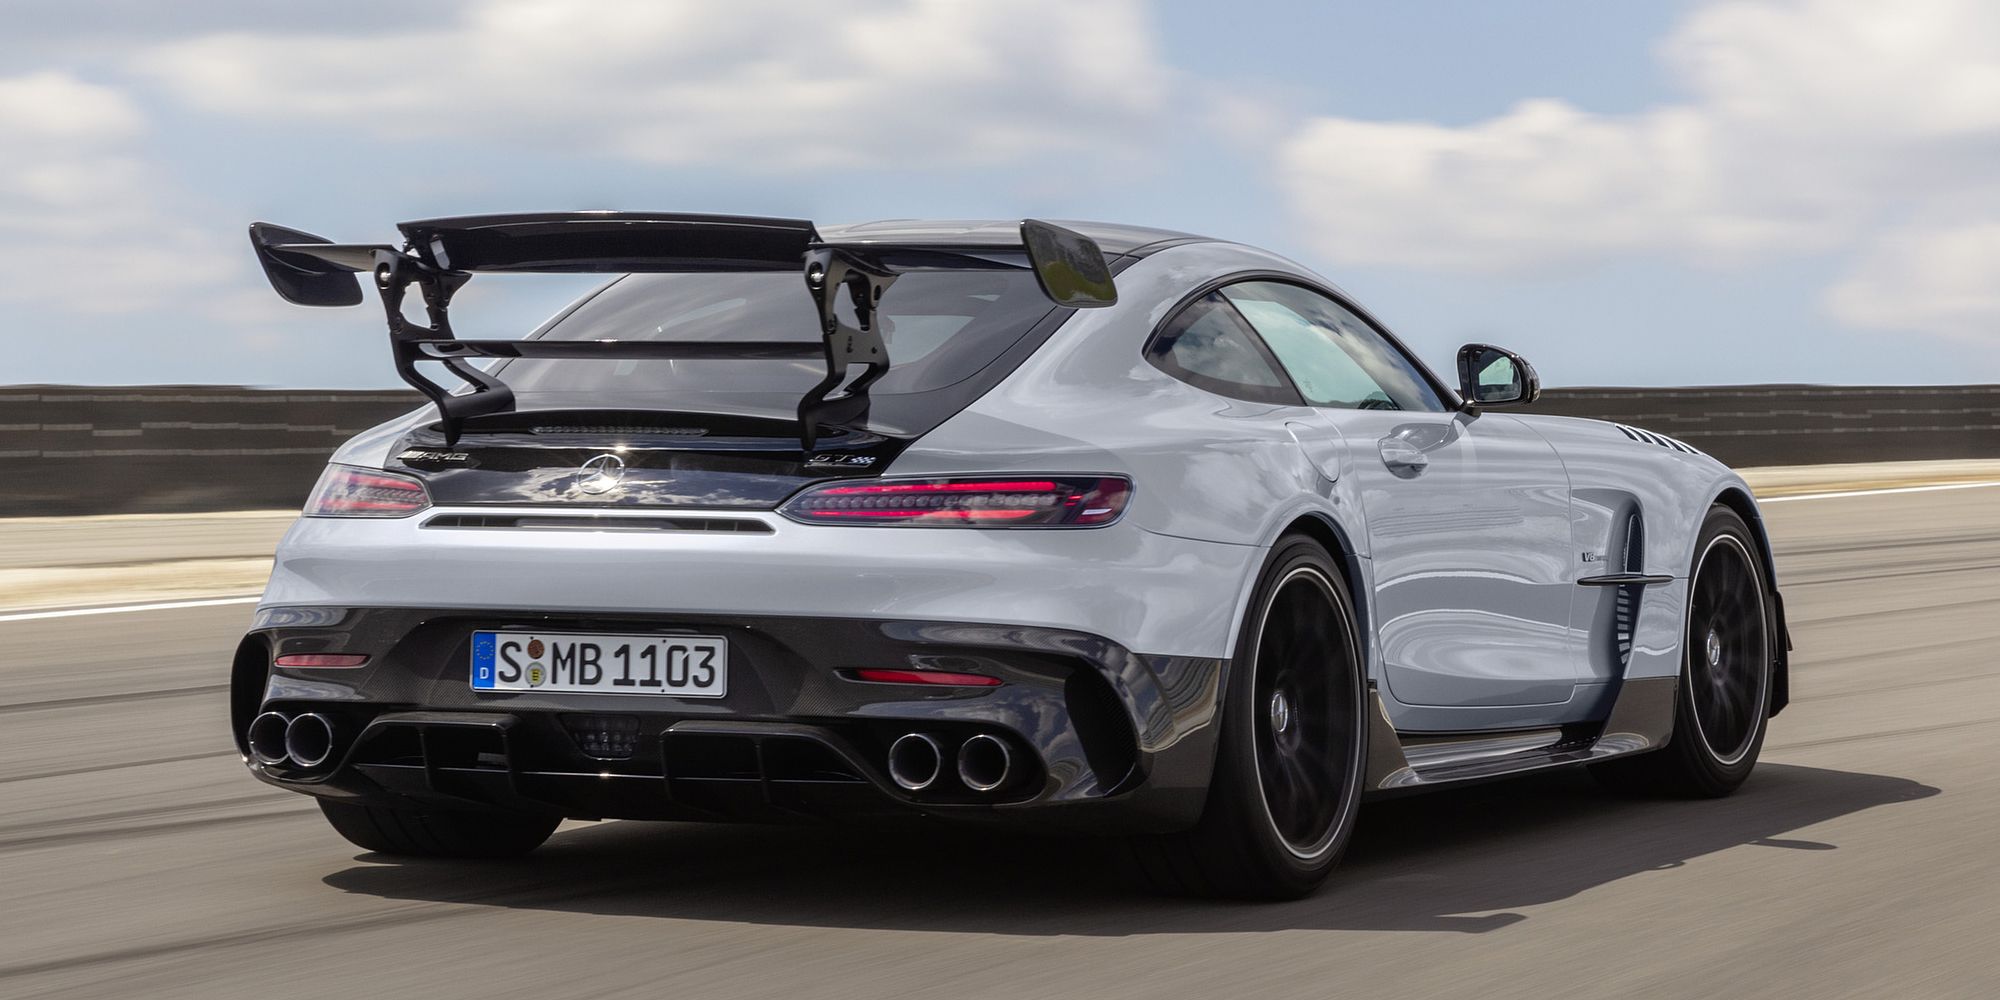 The rear of the AMG GT Black Series